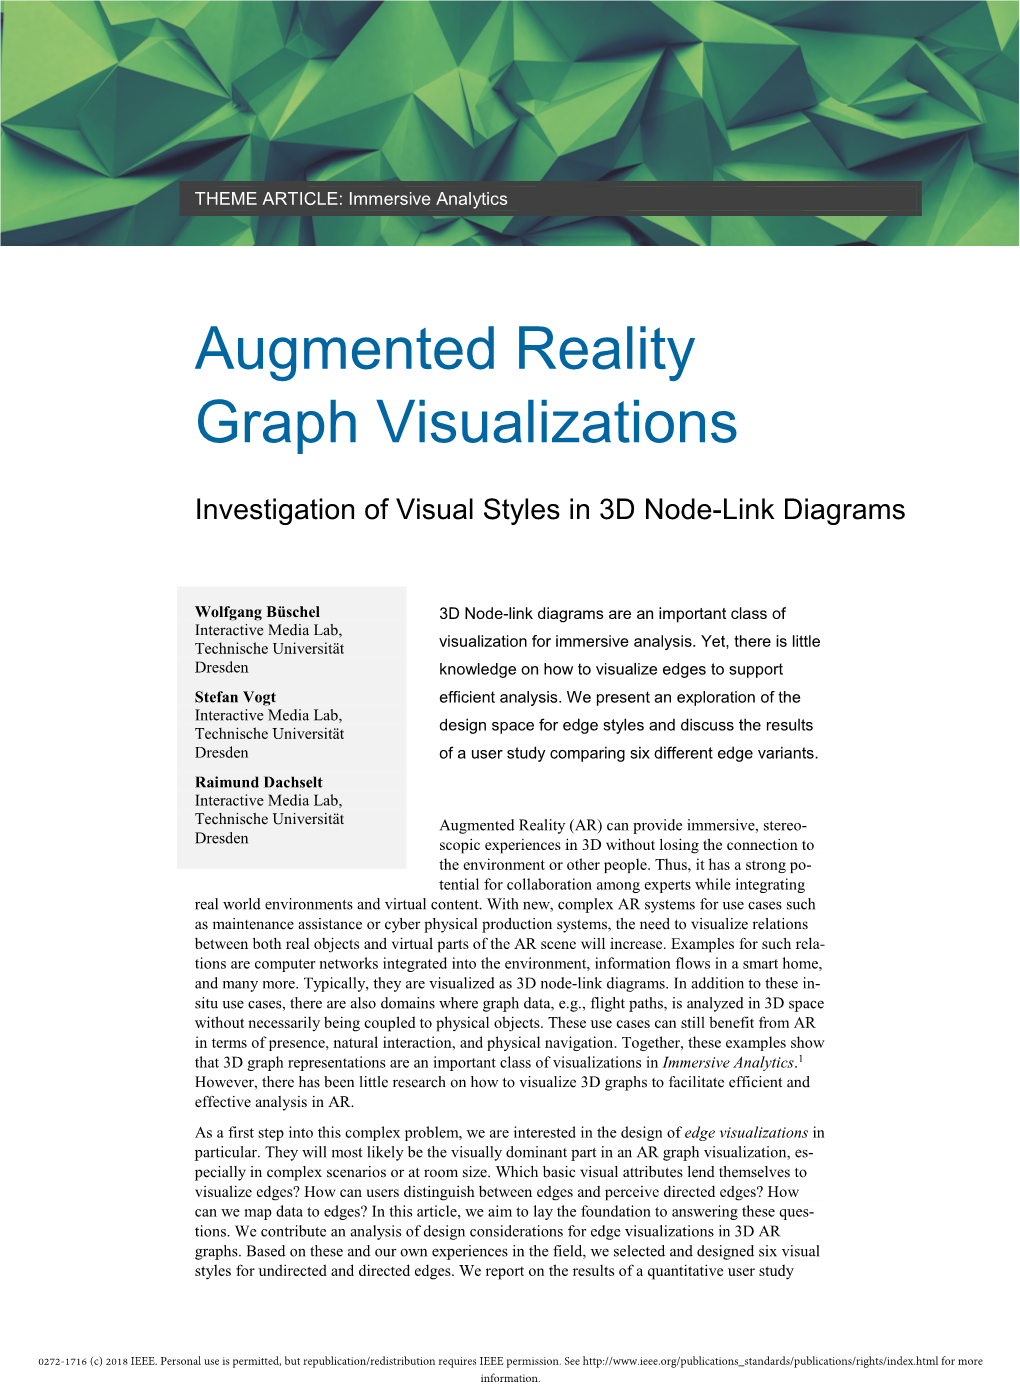 Augmented Reality Graph Visualizations